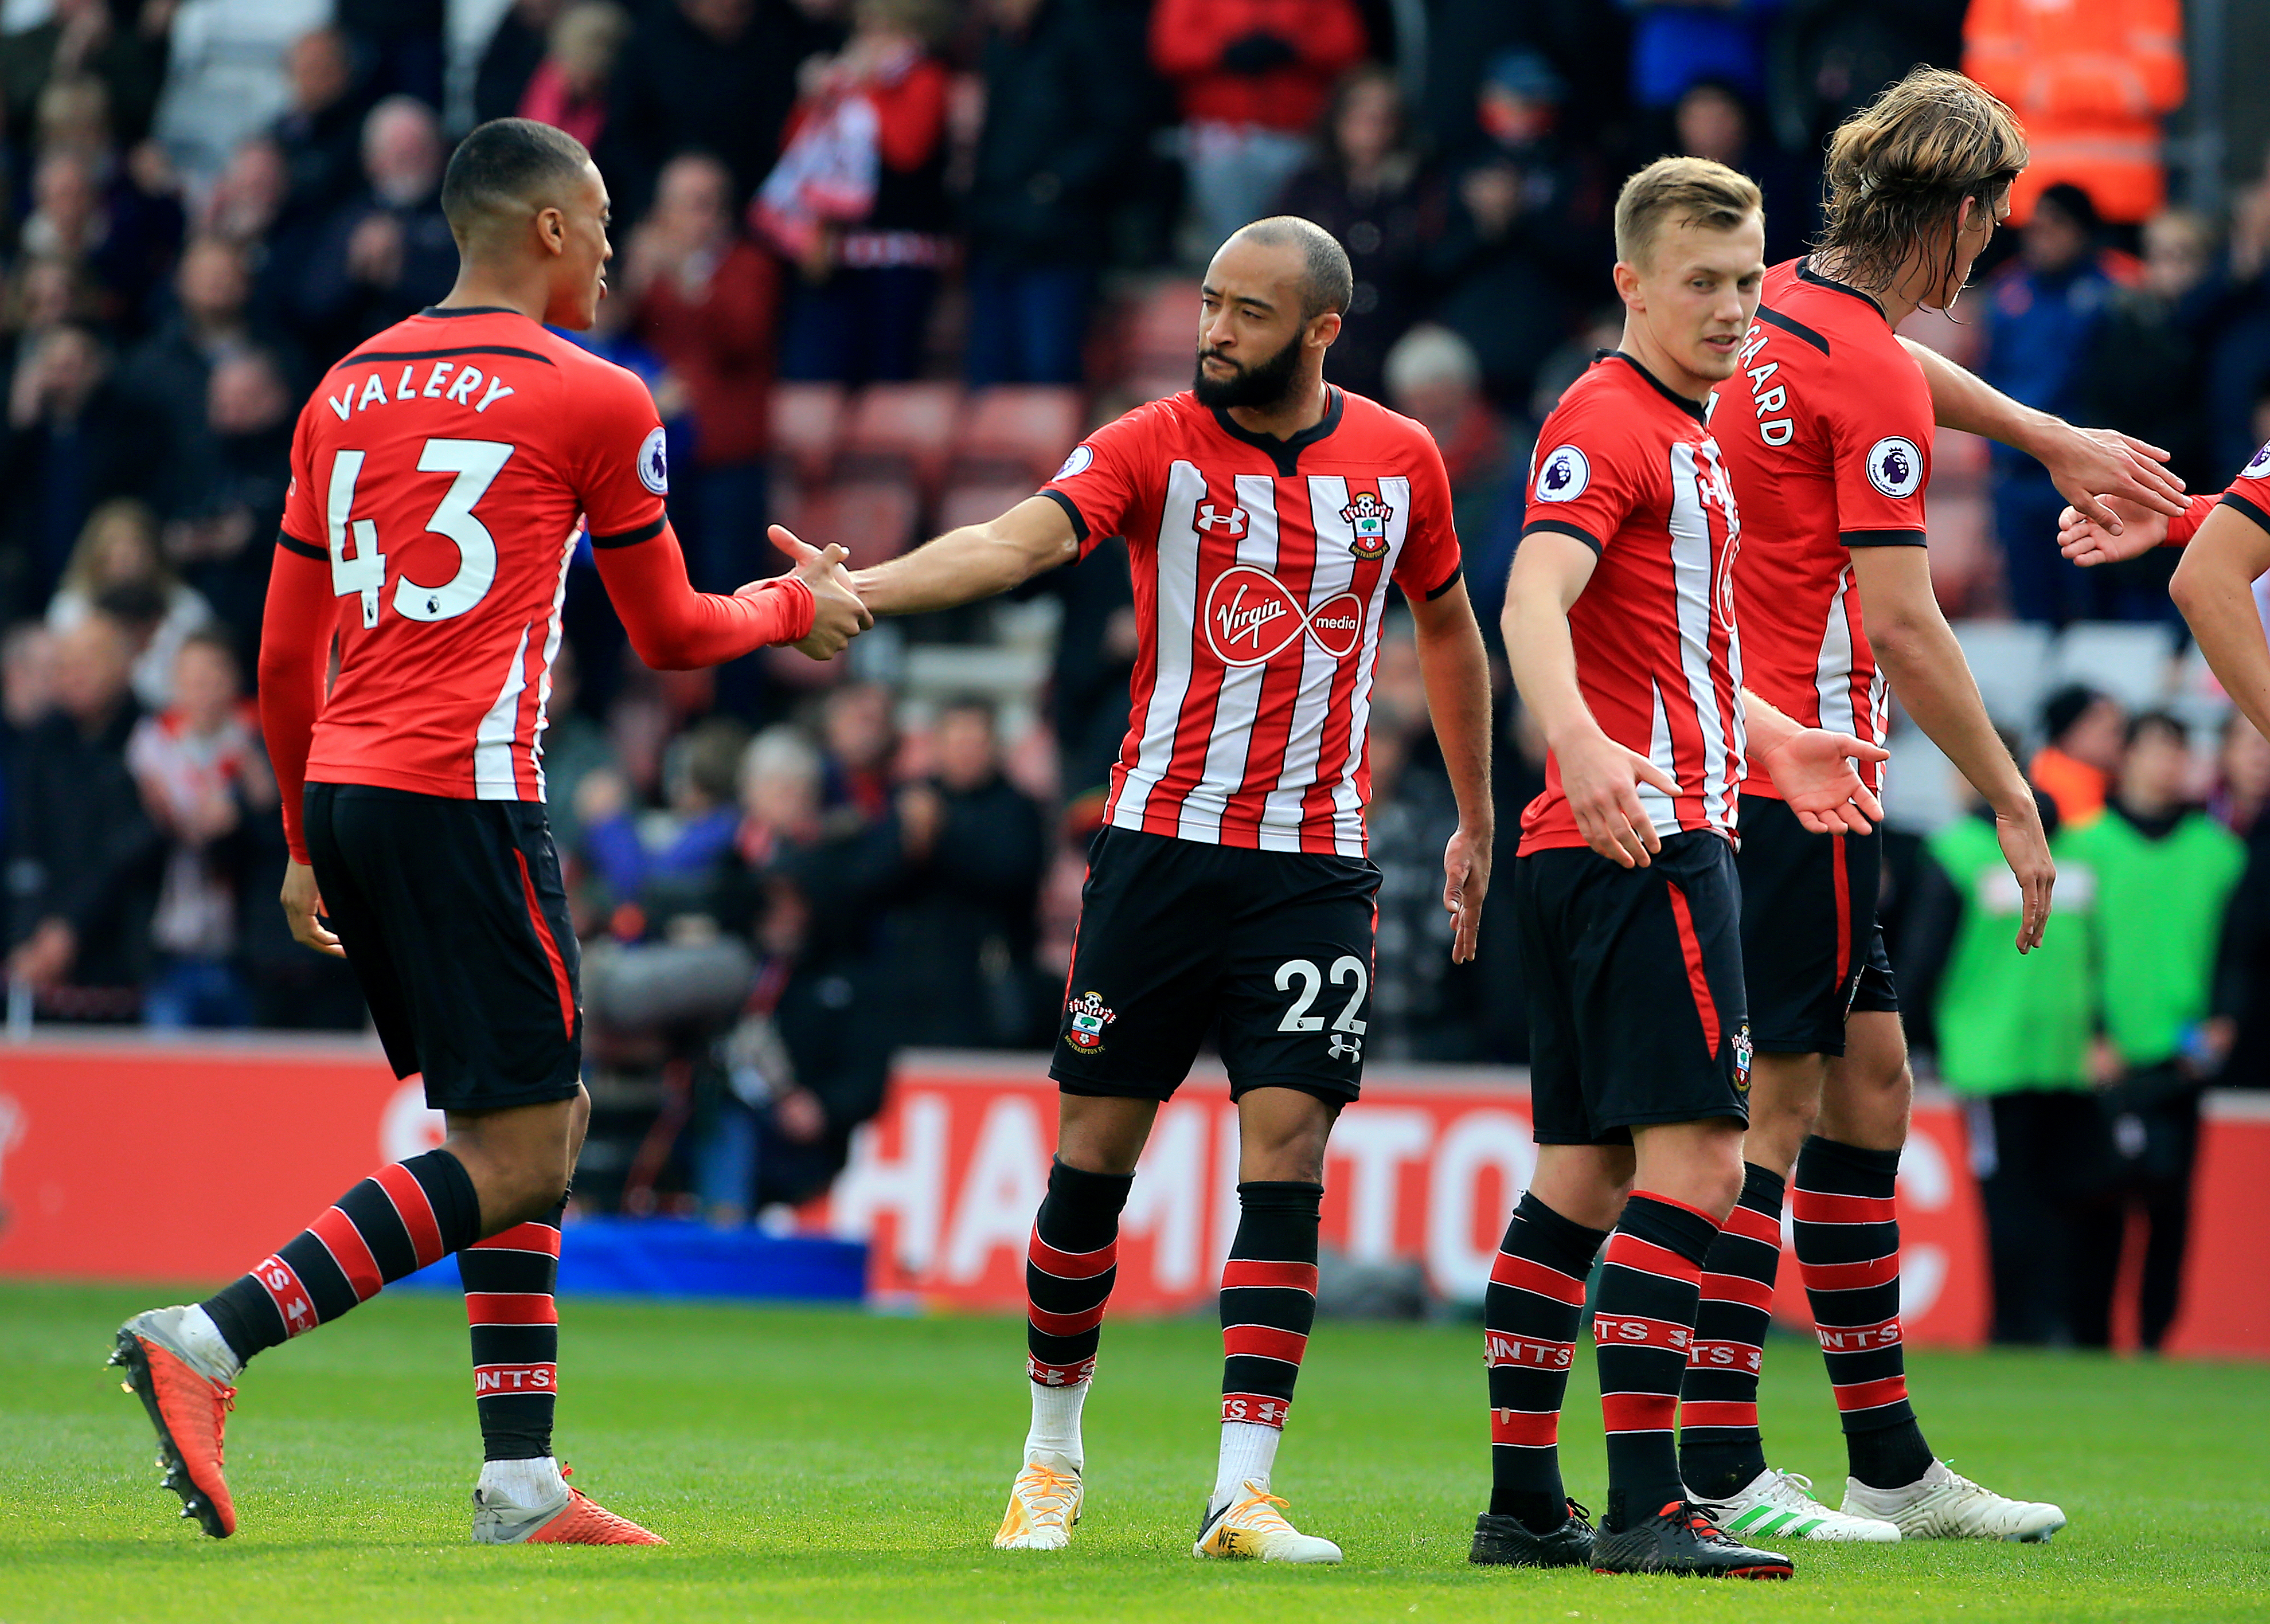 Southampton's Yan Valery (left) and Southampton's Nathan Redmond (22) after the final whistle during a Premier League match